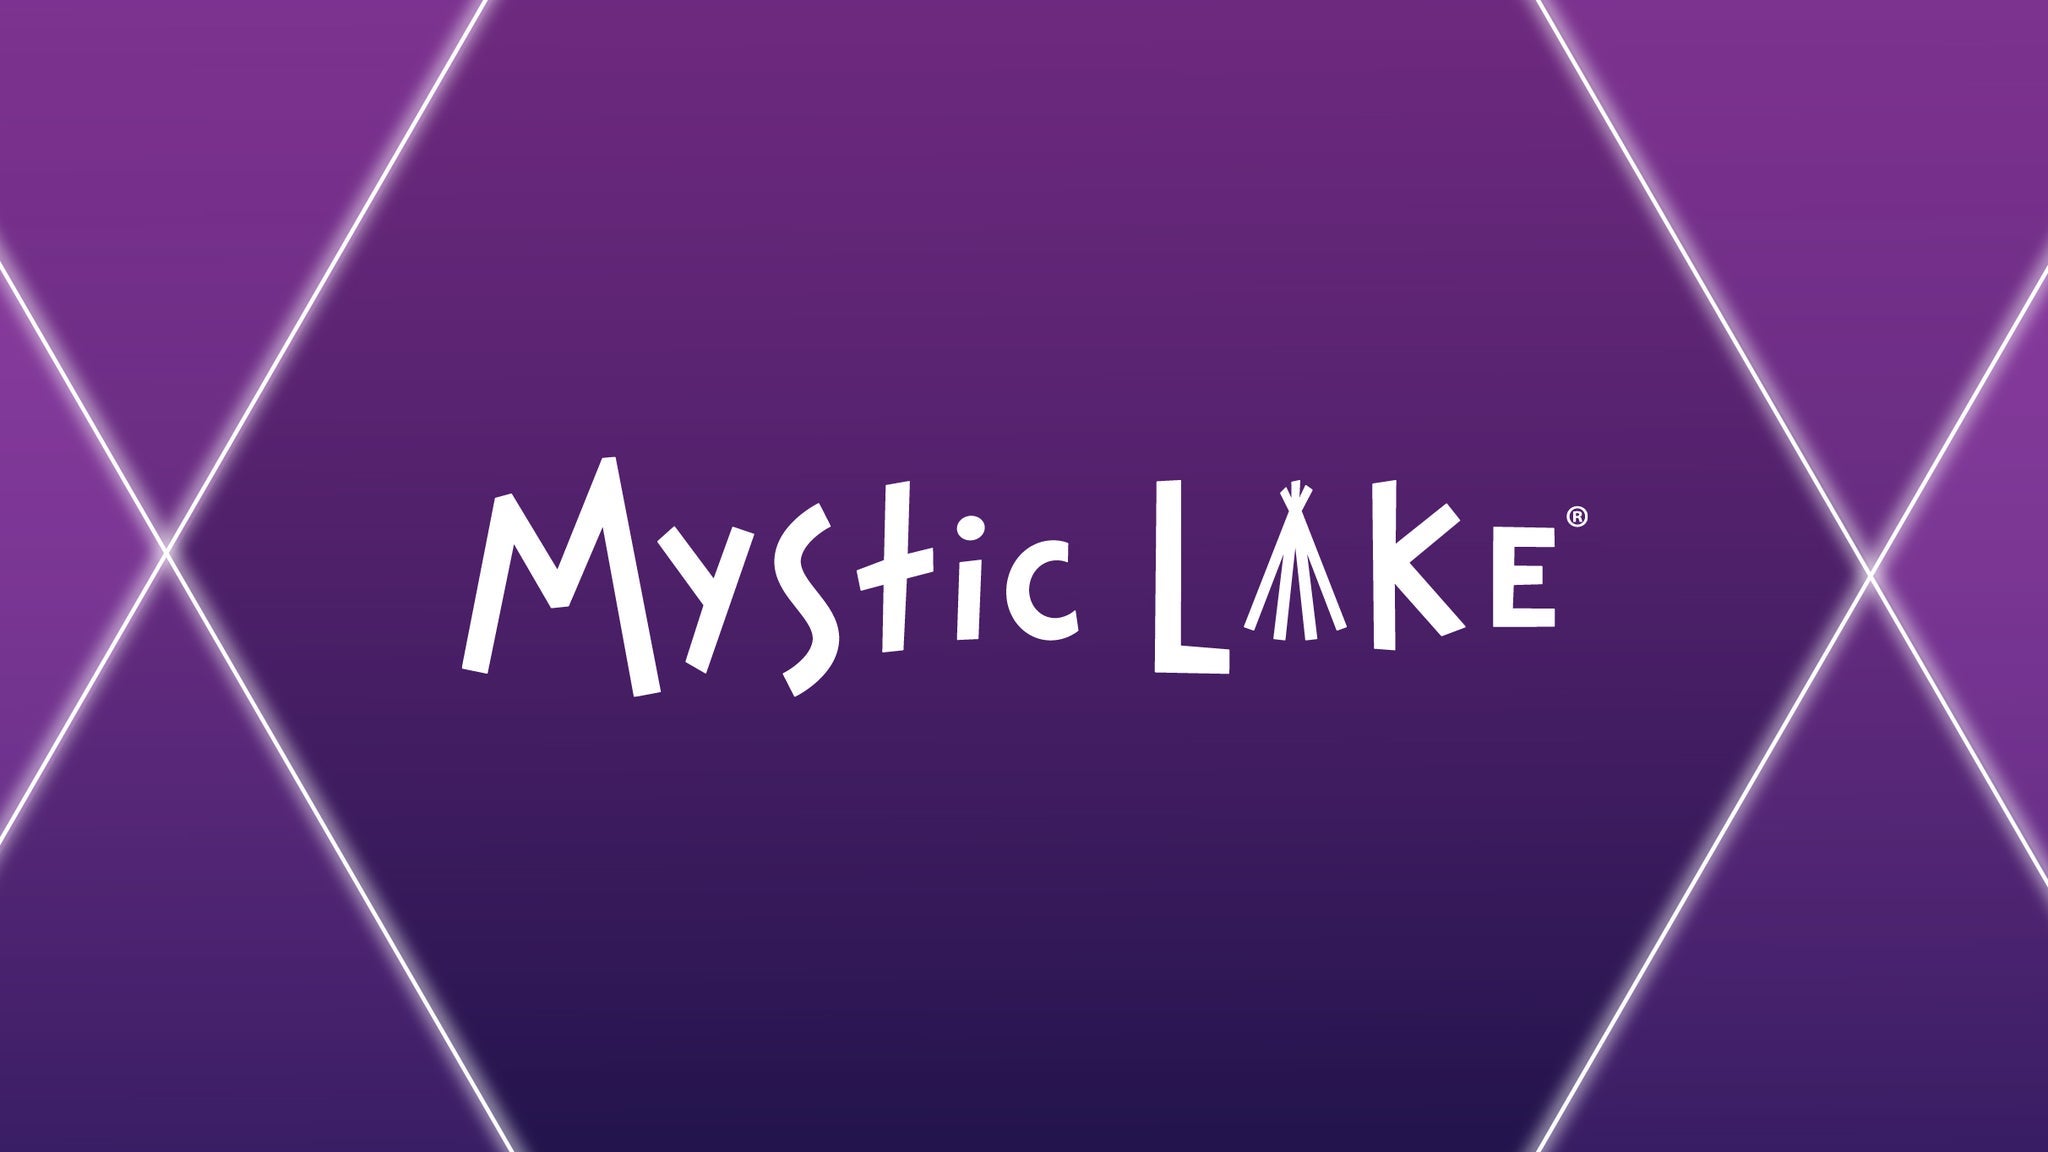 Rock, Brats & Beer - Saturday in Prior Lake promo photo for Mystic Email presale offer code